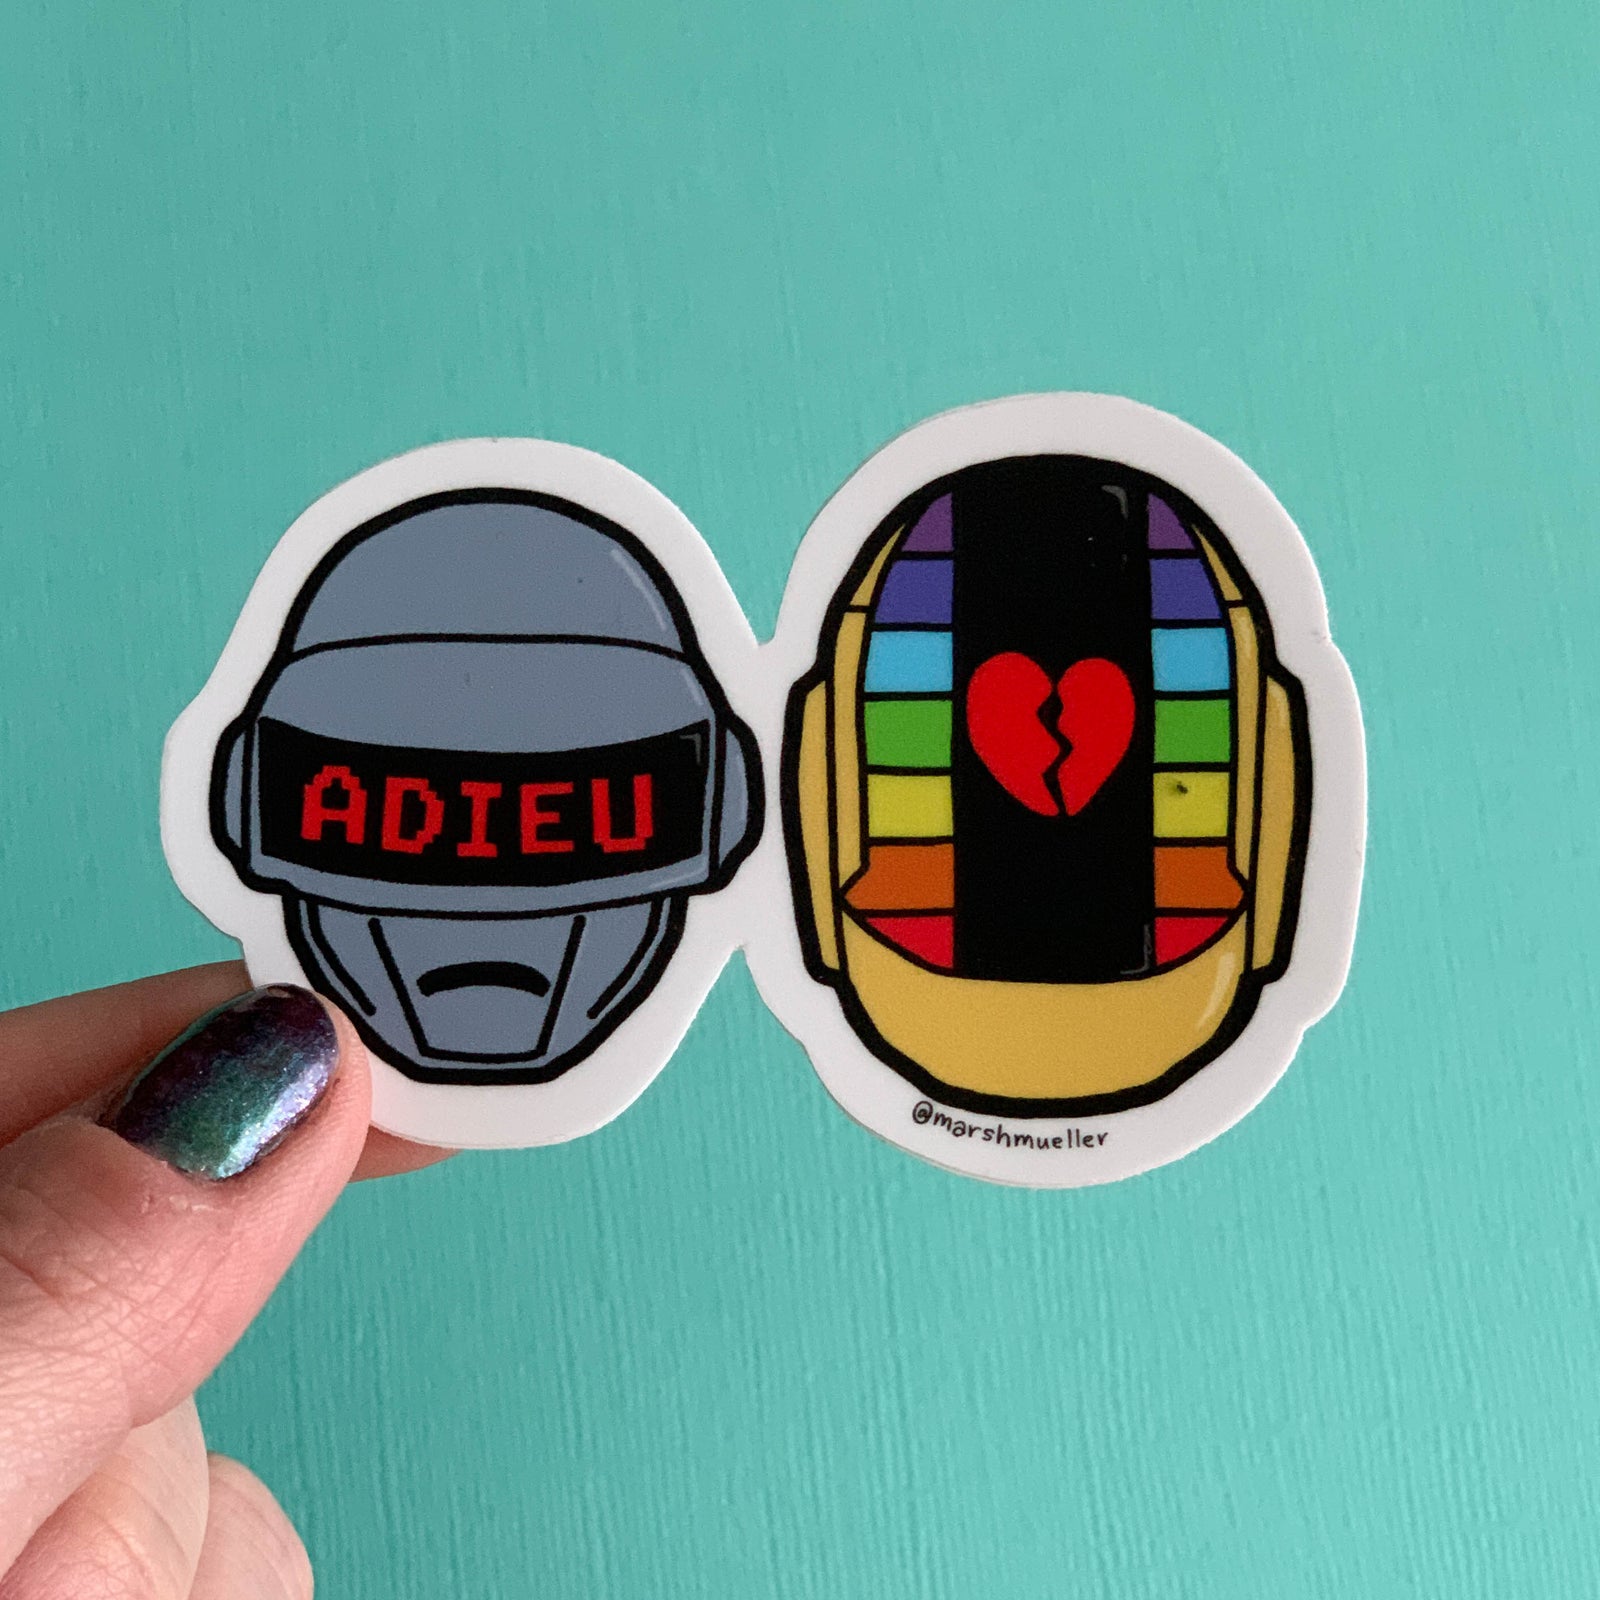 Hand holding a Daft Punk helmets sticker on a teal background